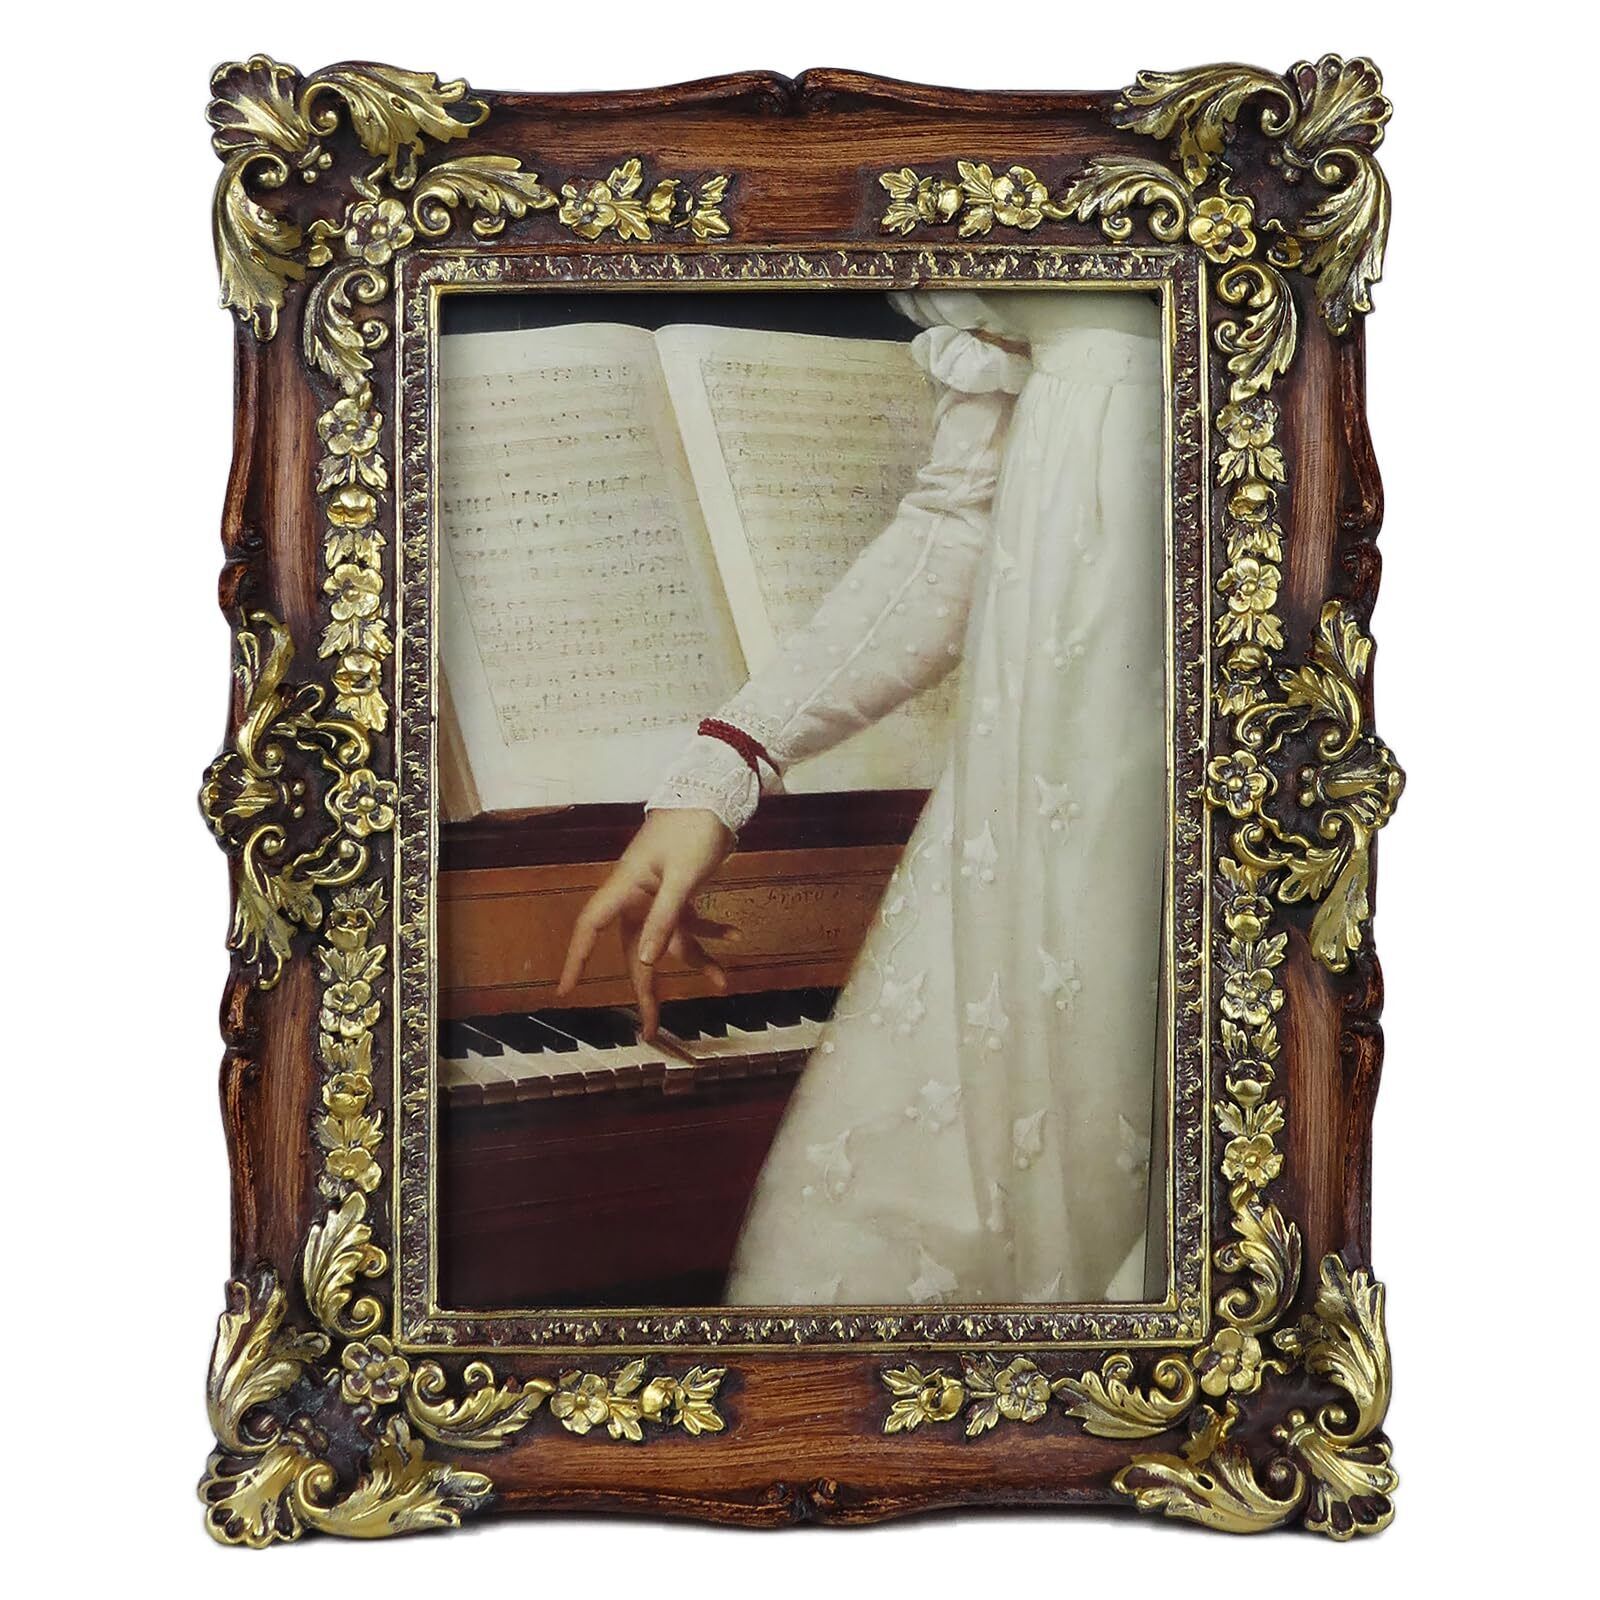 5x7 Antique Frame with Ornate Vintage Carved Decor, Luxury Baroque Picture Fr...